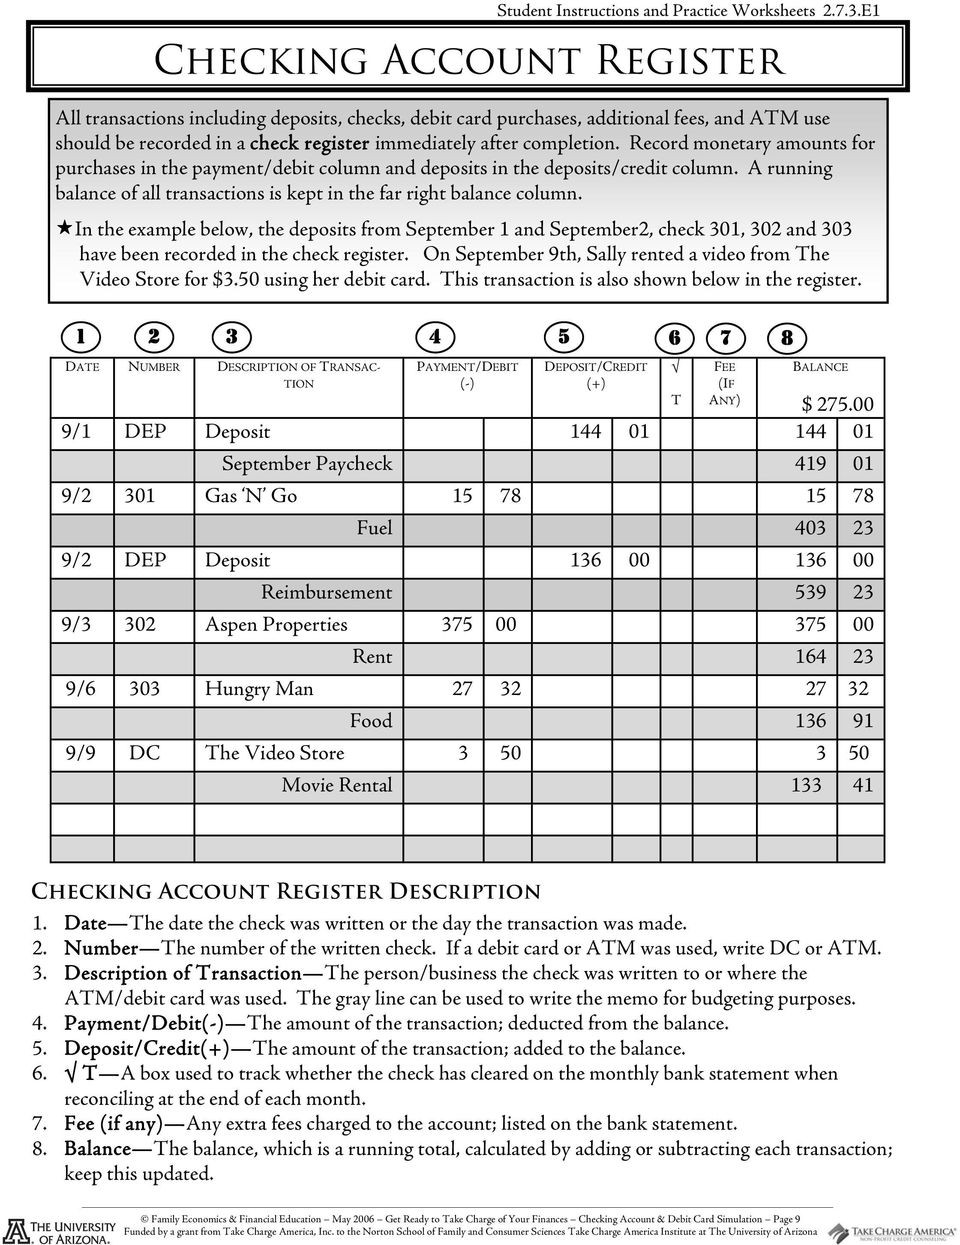 Checkbook Register Worksheet 1 Answers Checking Account and Debit Card Simulation Pdf Free Download